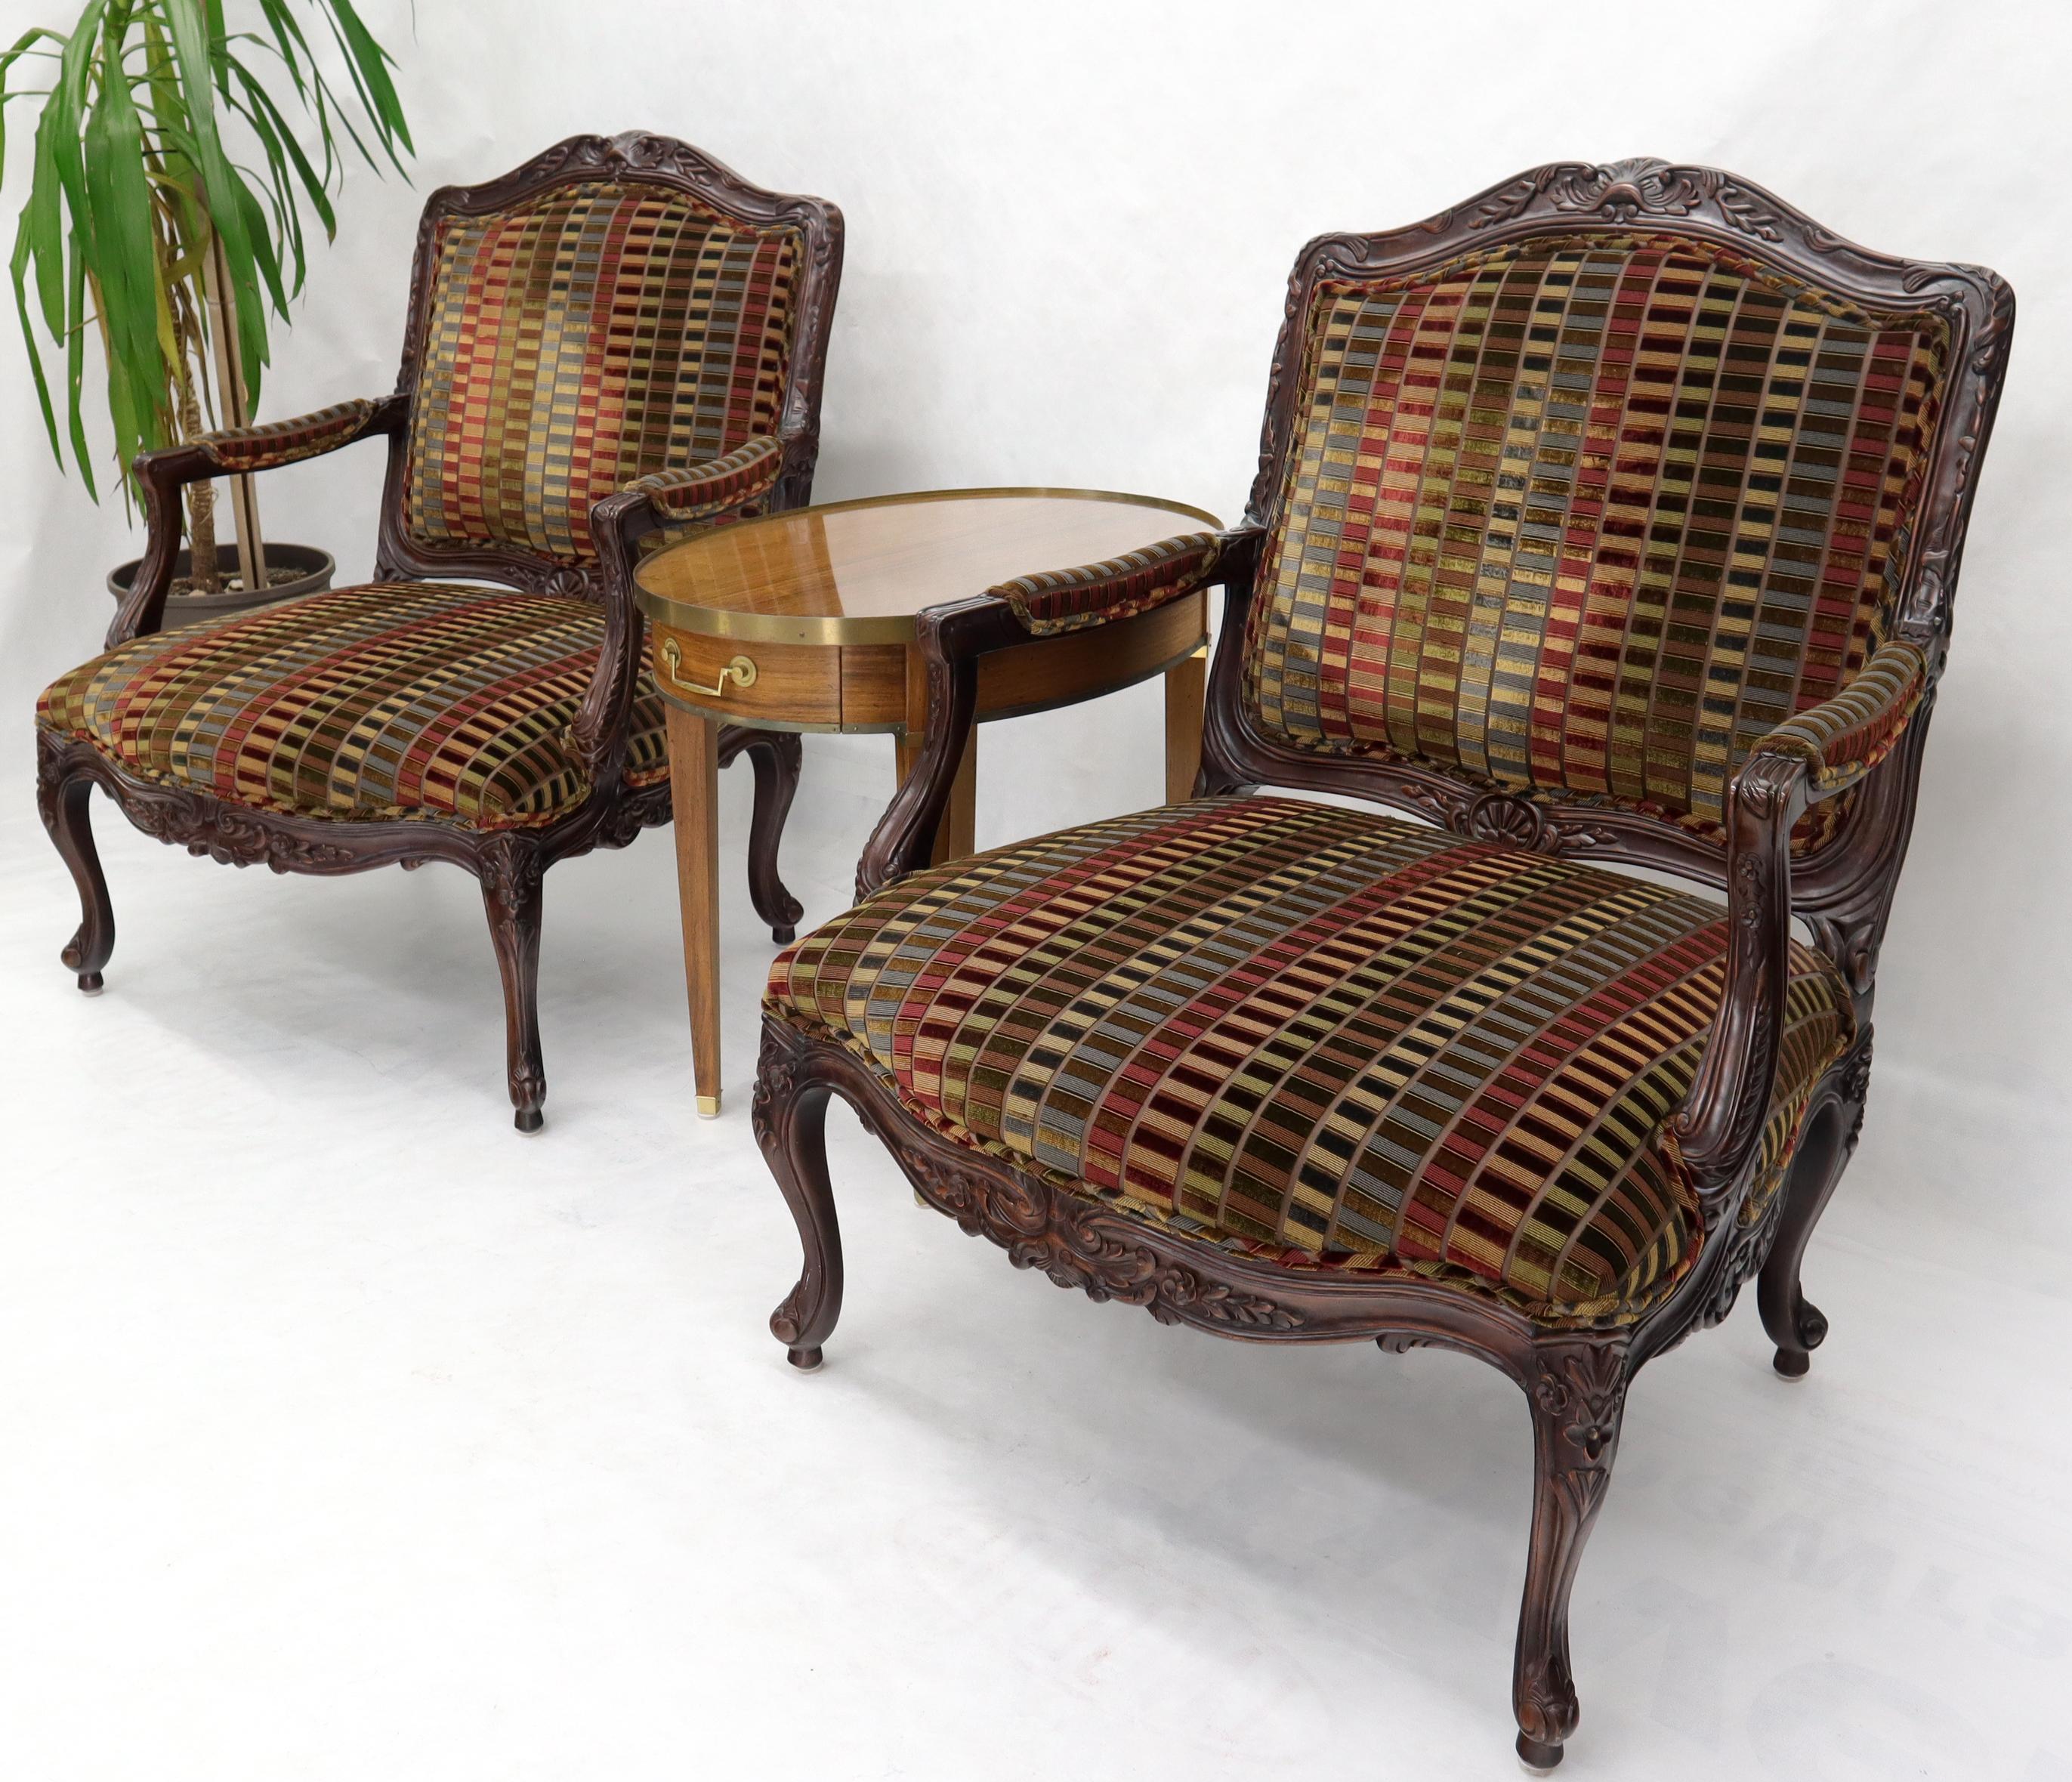 Pair of carved patterned multi-color velvet like upholstery lounge armchairs extra wide seats.